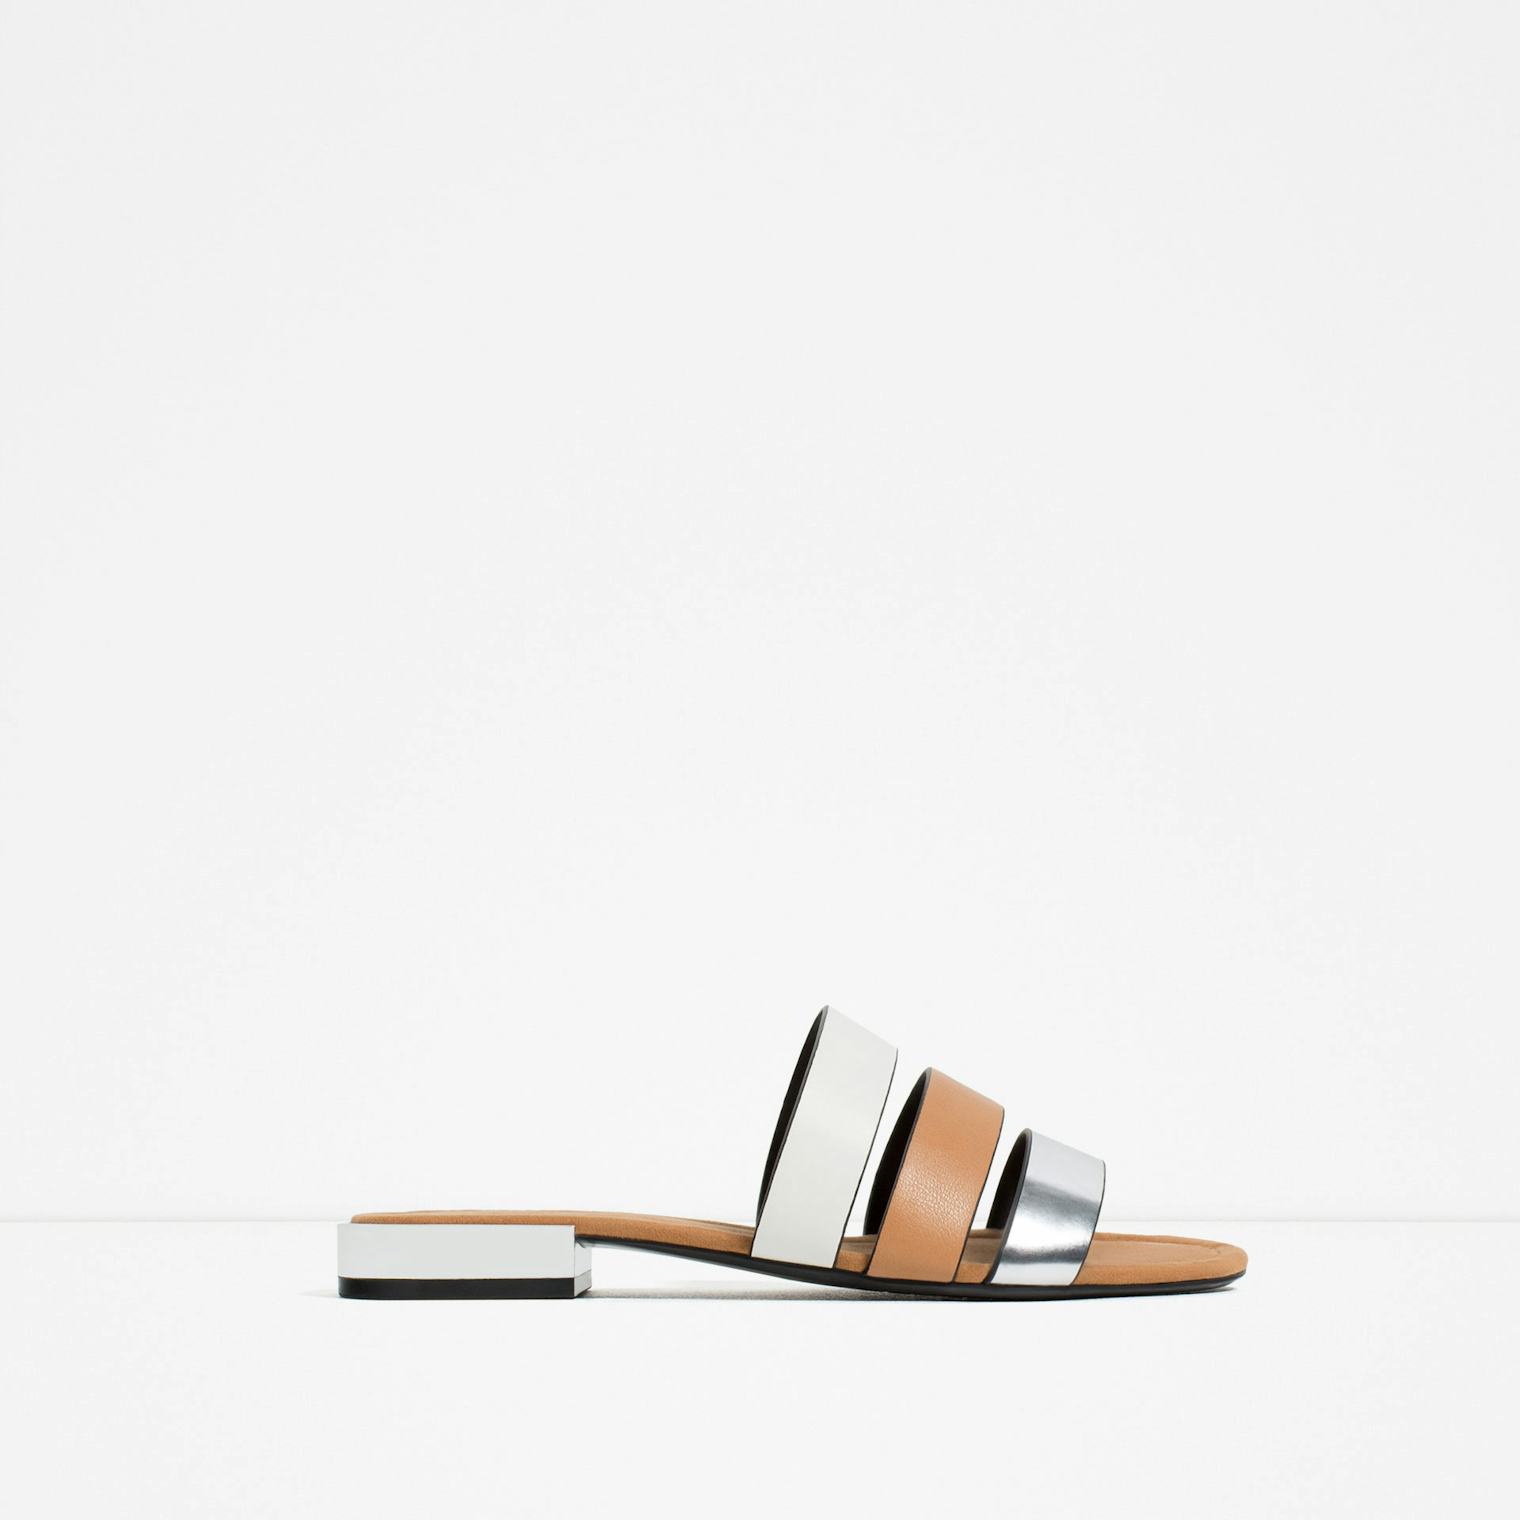 Slide On Sandals You Can Wear Anywhere